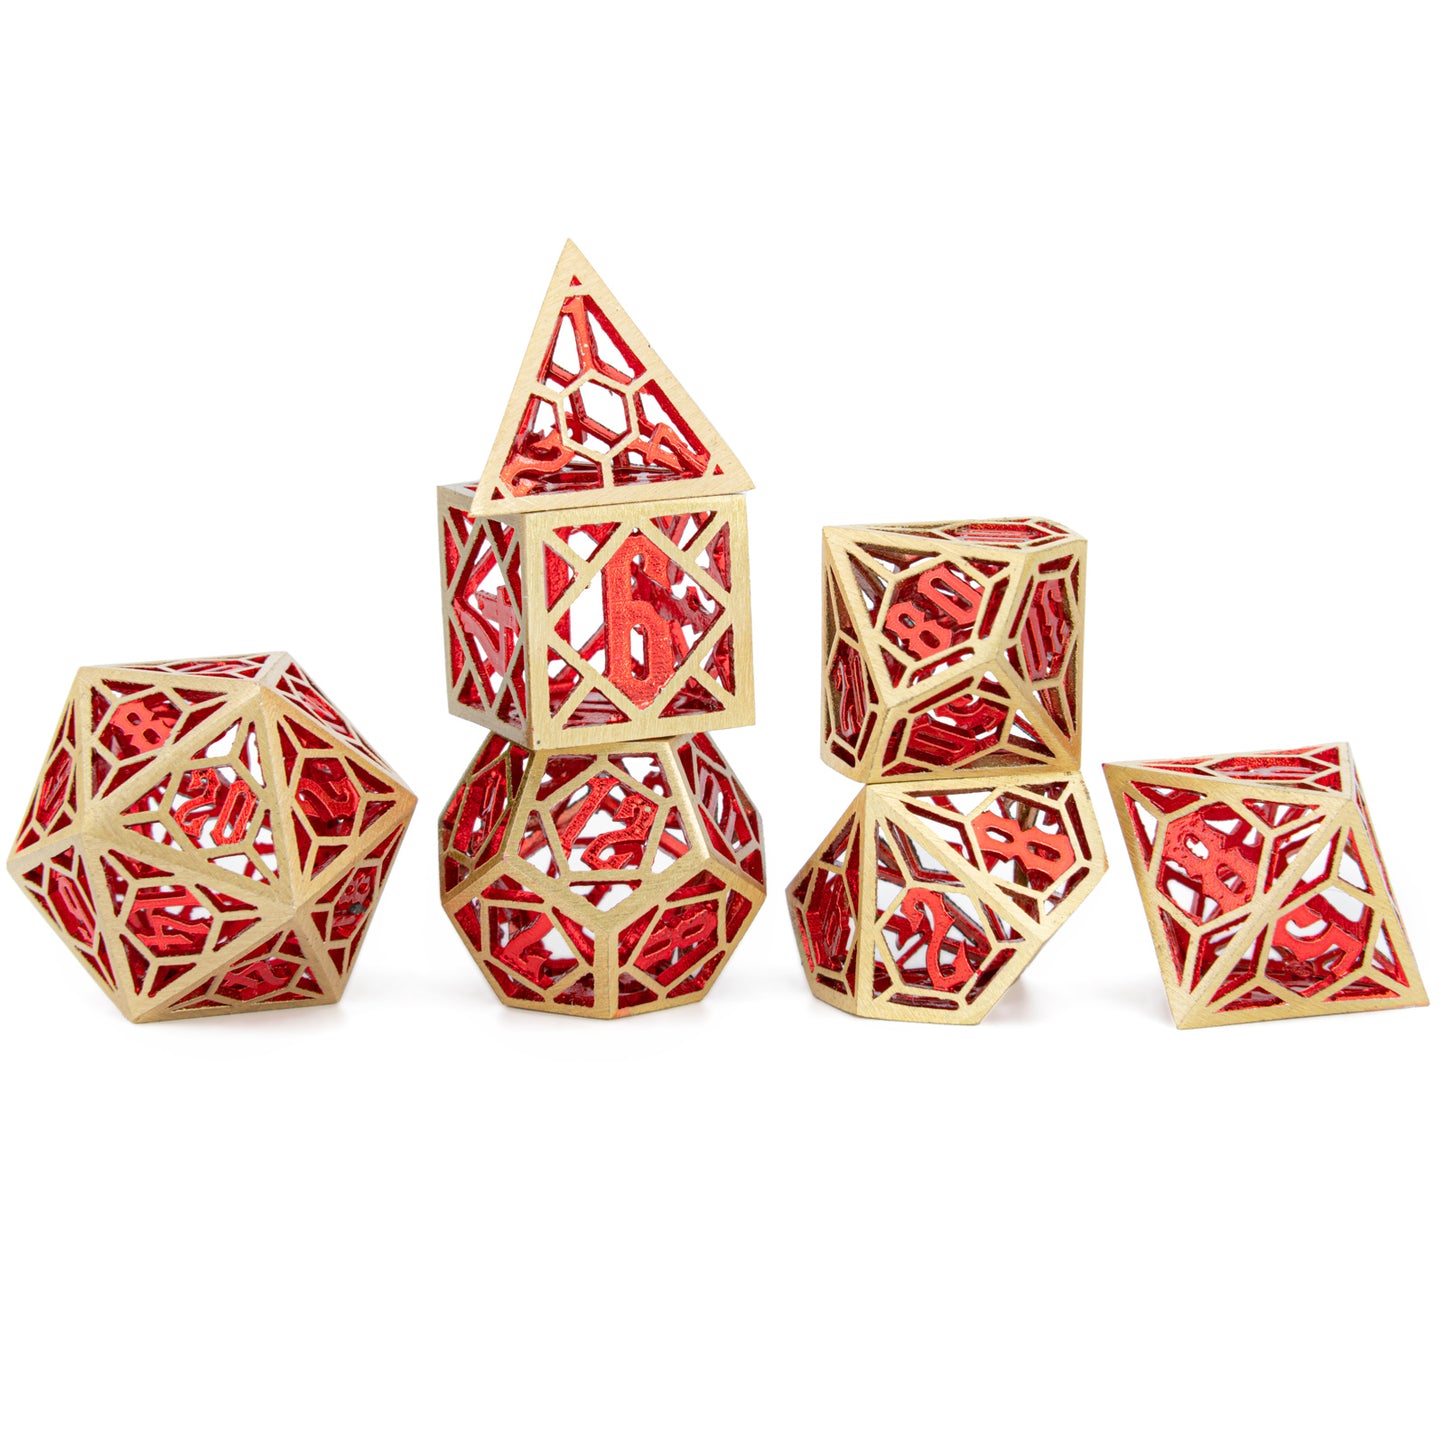 Dragon Nest Hollow Red and Gold Dice set